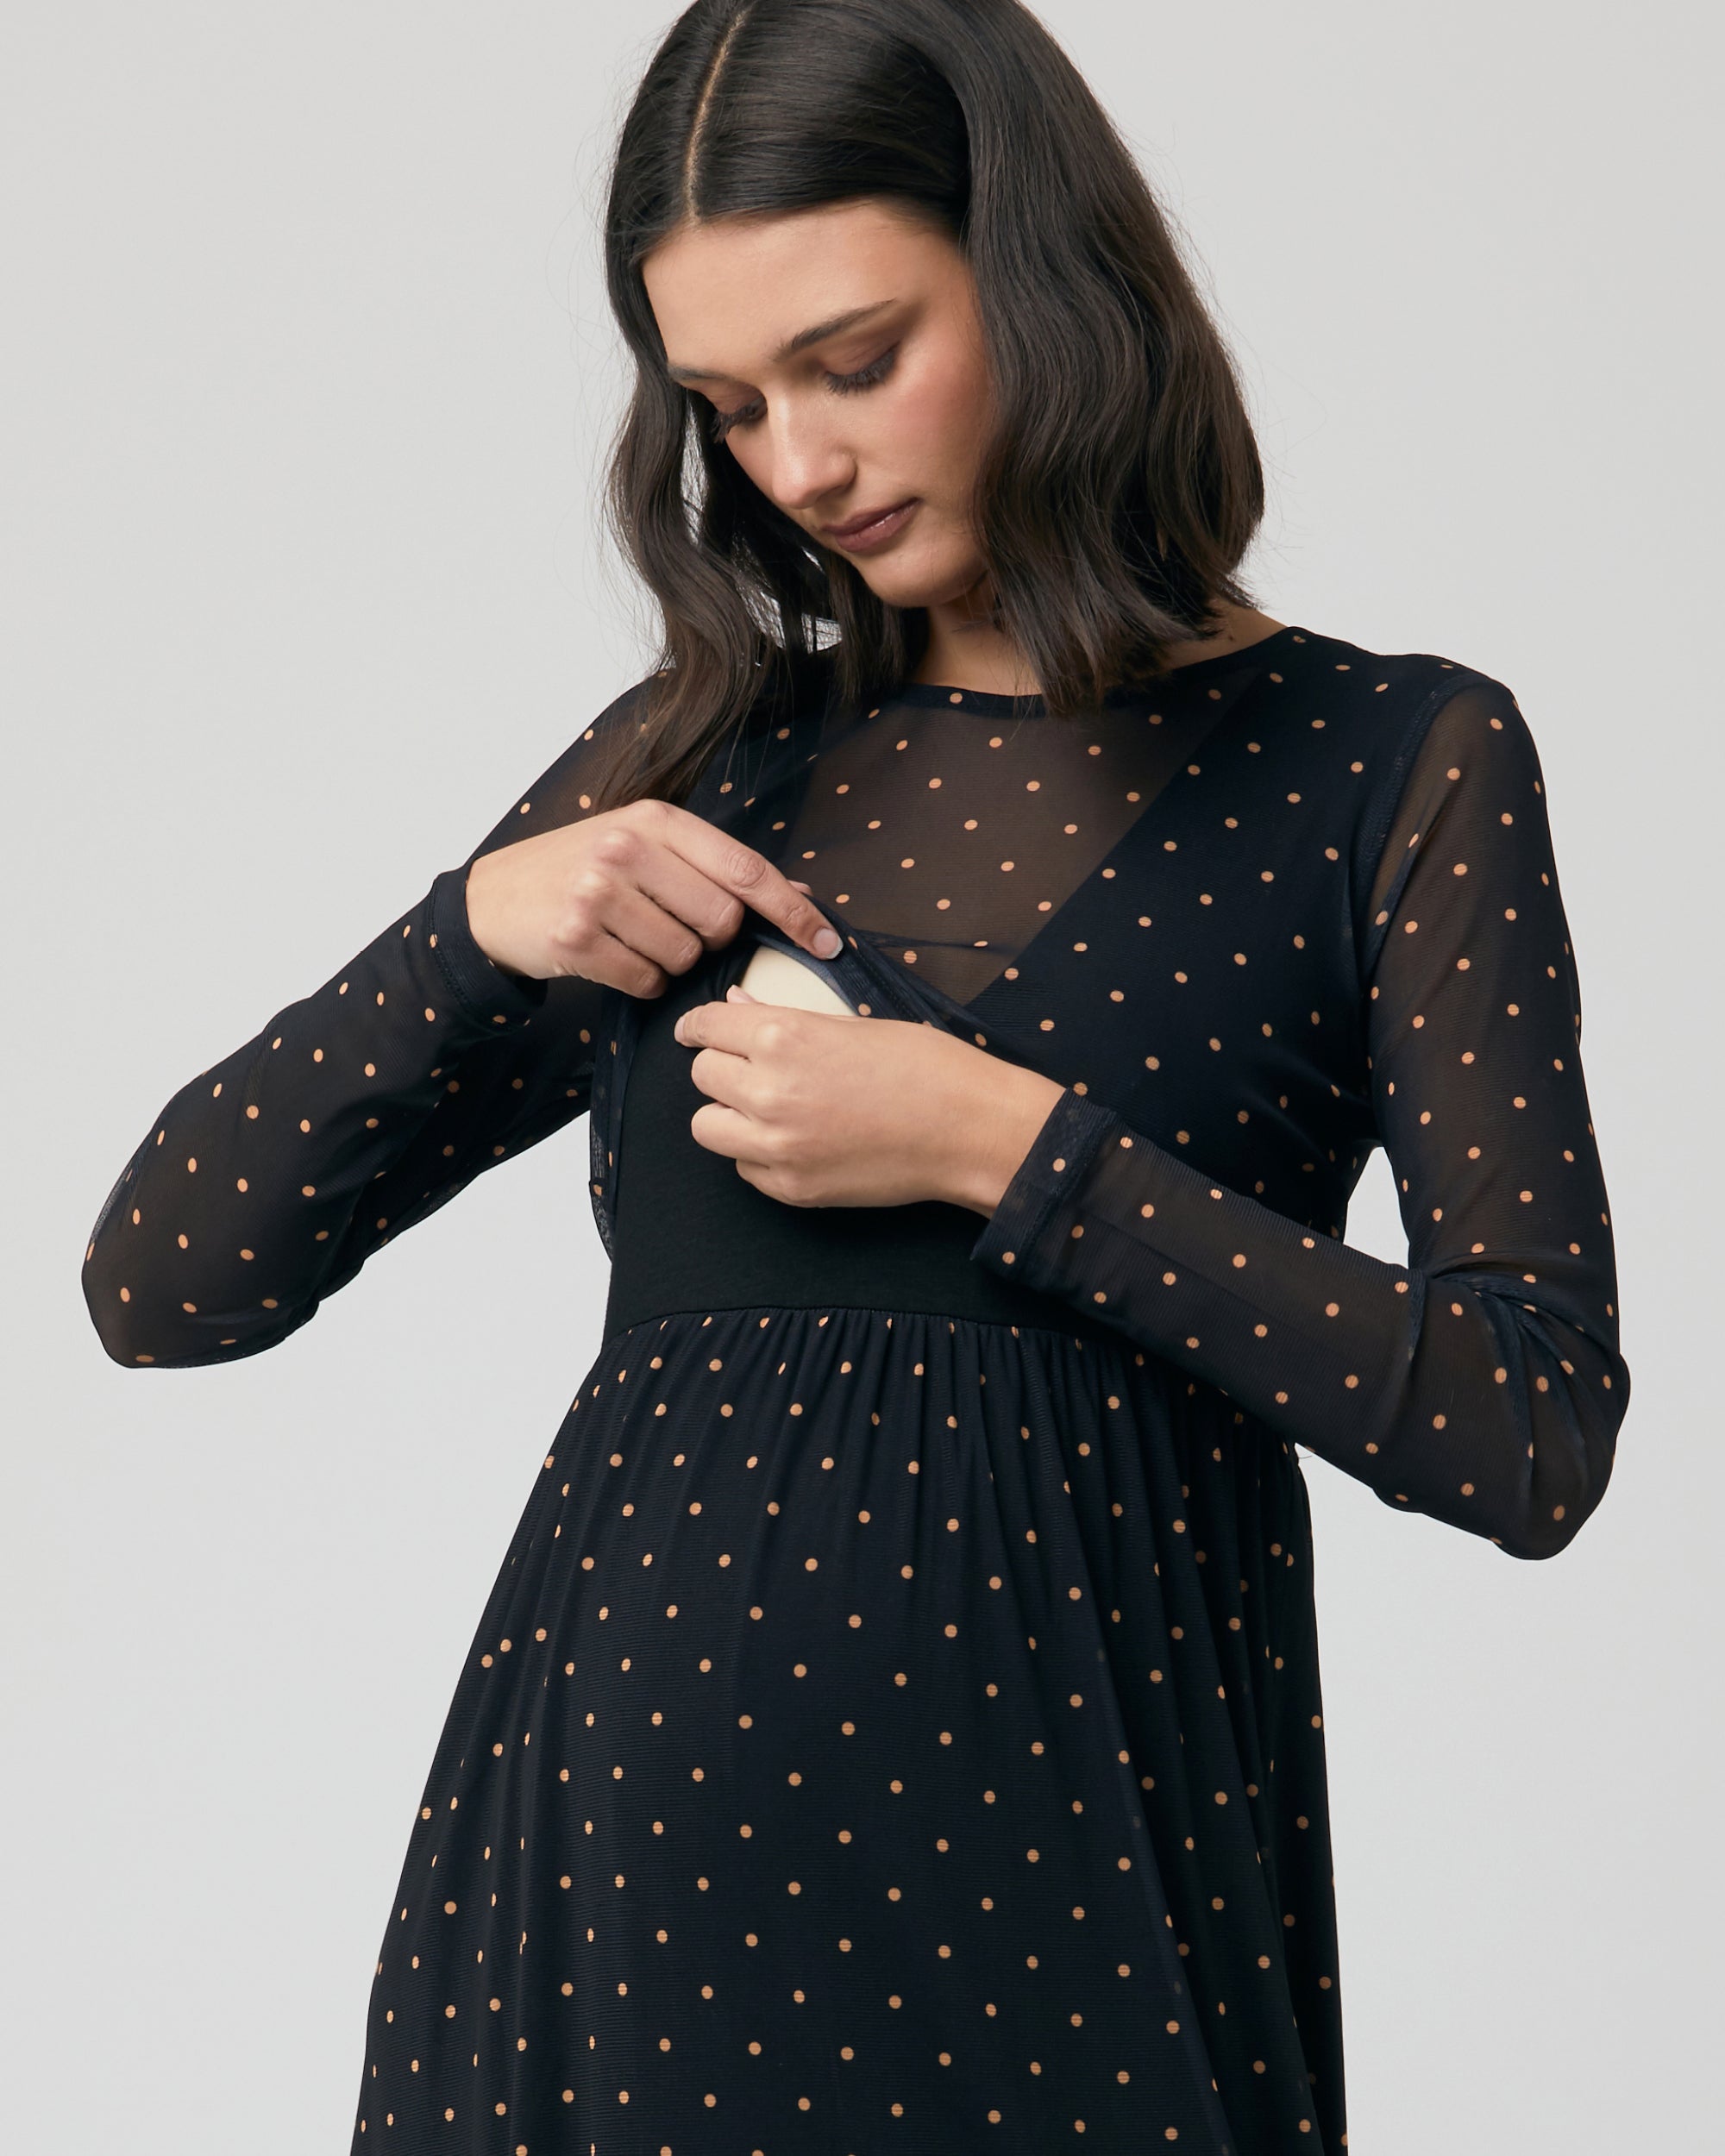 Layered Knit Nursing Dress in Black by Ripe Maternity for Hire